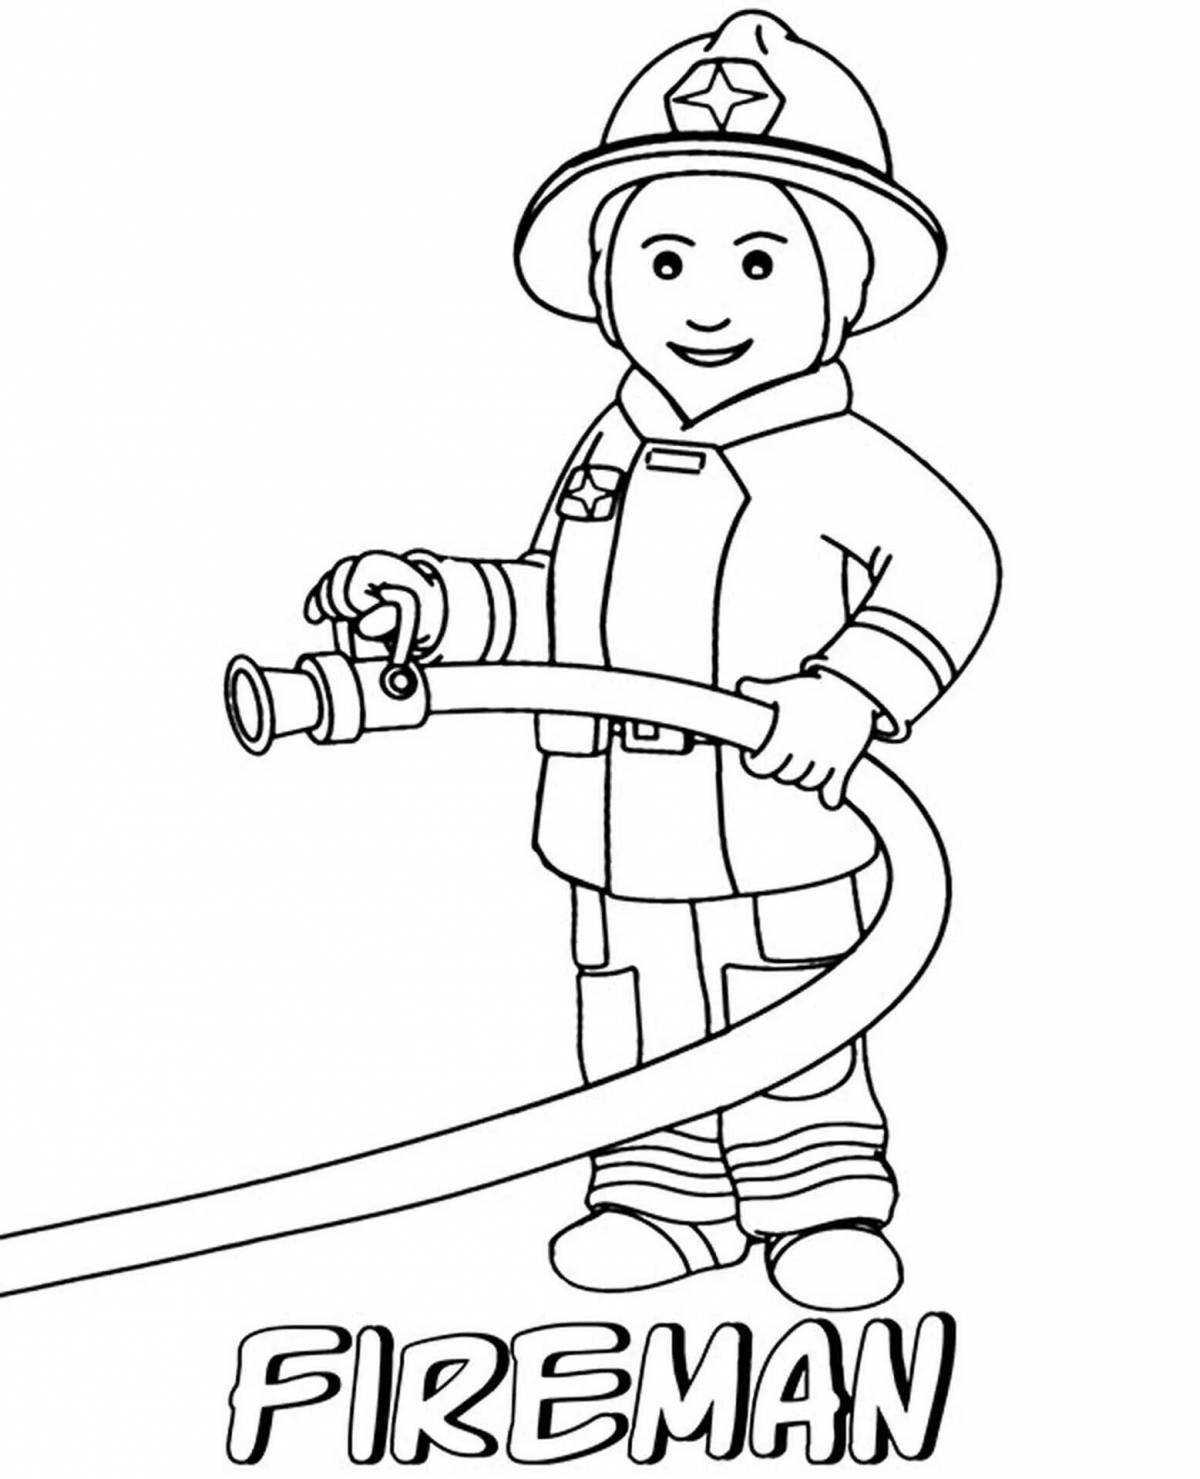 Glorious firefighter coloring pages for kids